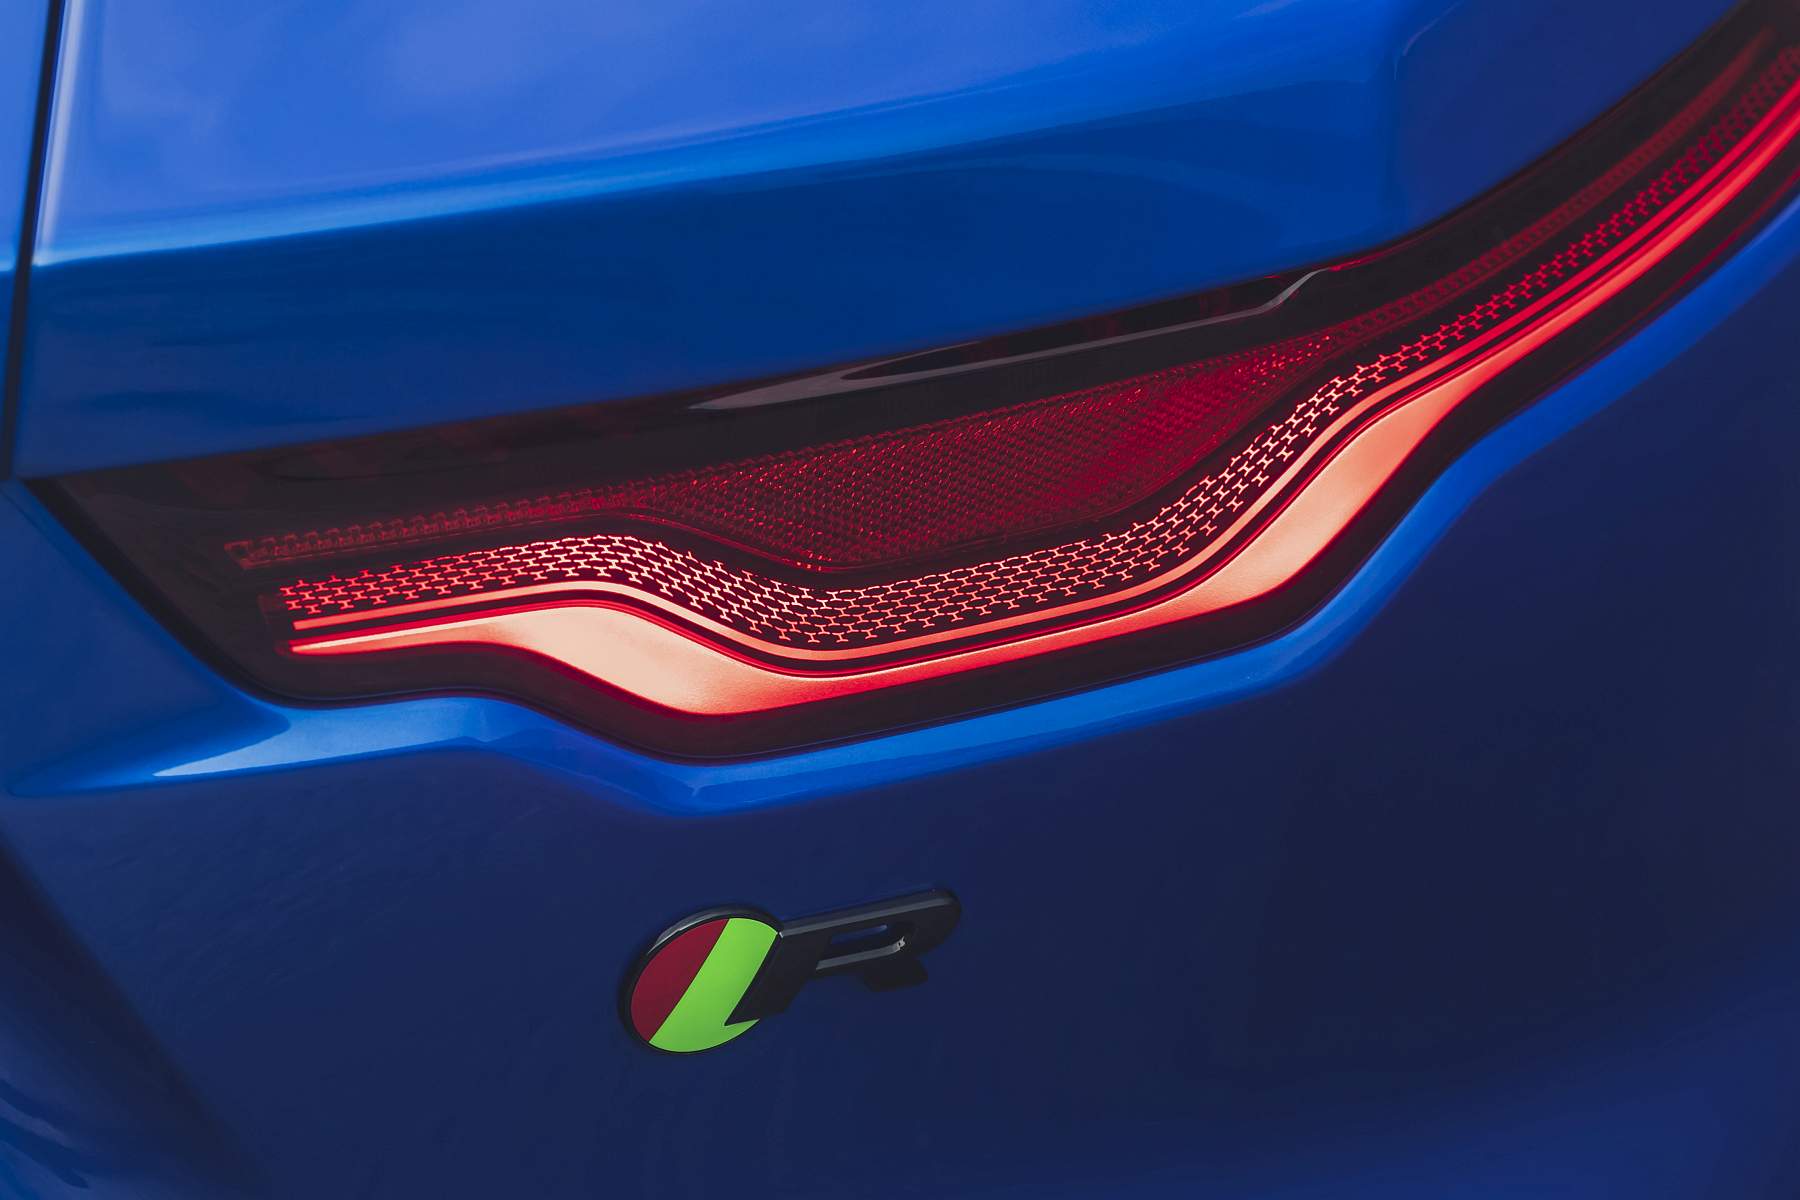 Jag_F-TYPE_21MY_Reveal_Image_Detail_Rearlight02.12.19_01